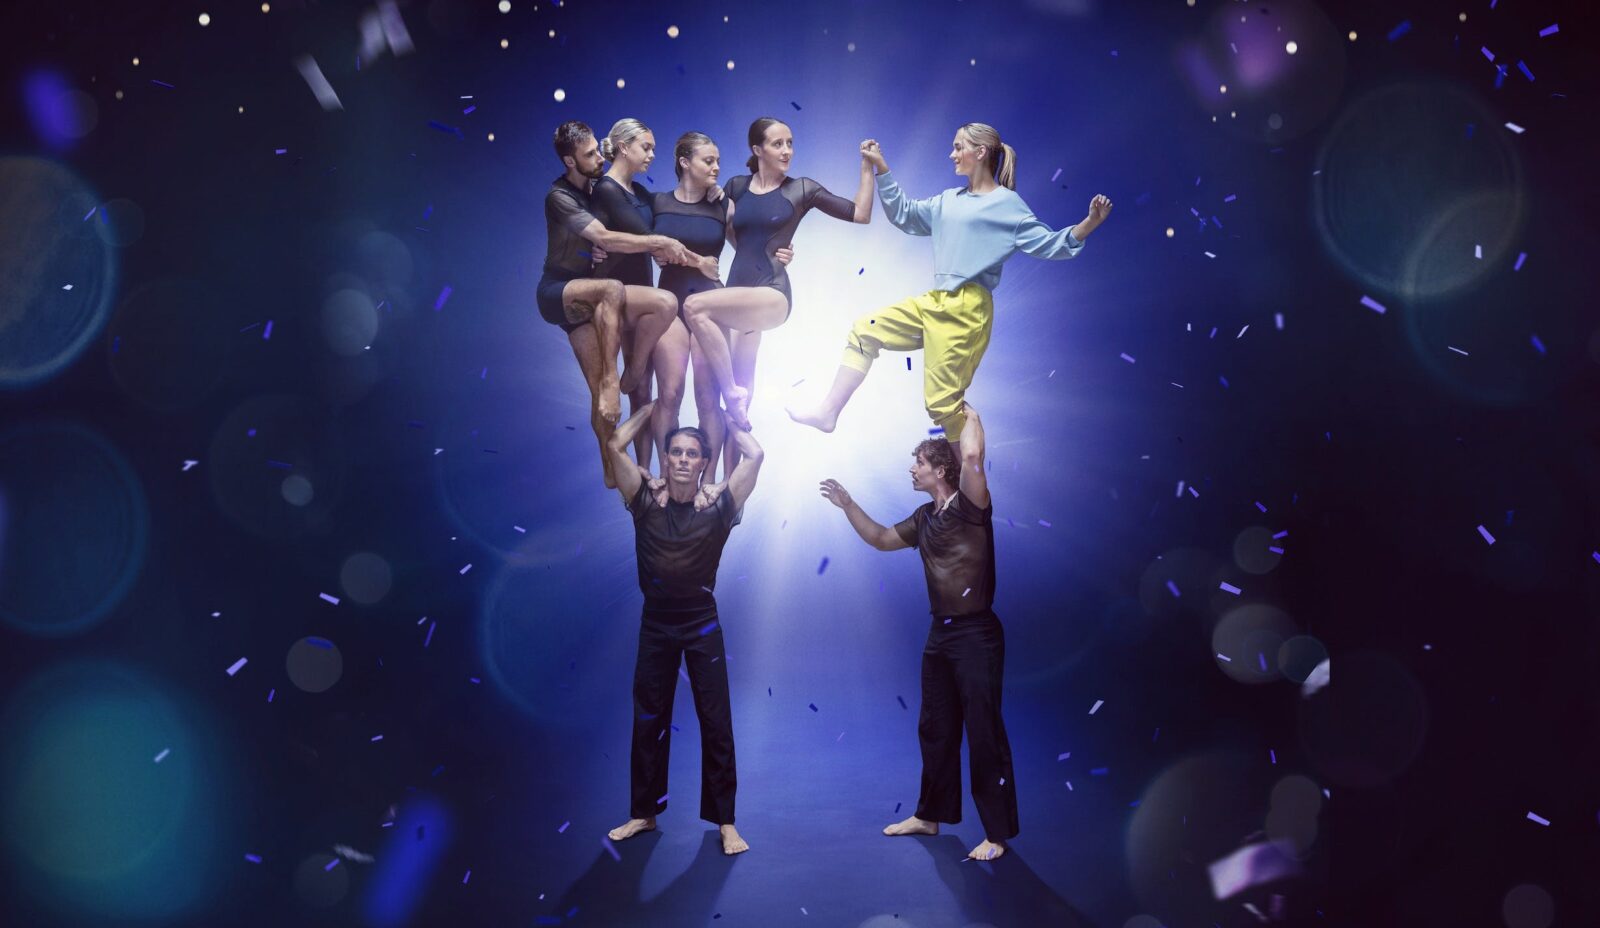 Performers standing on top of each other surrounded by a blue sparkly background.